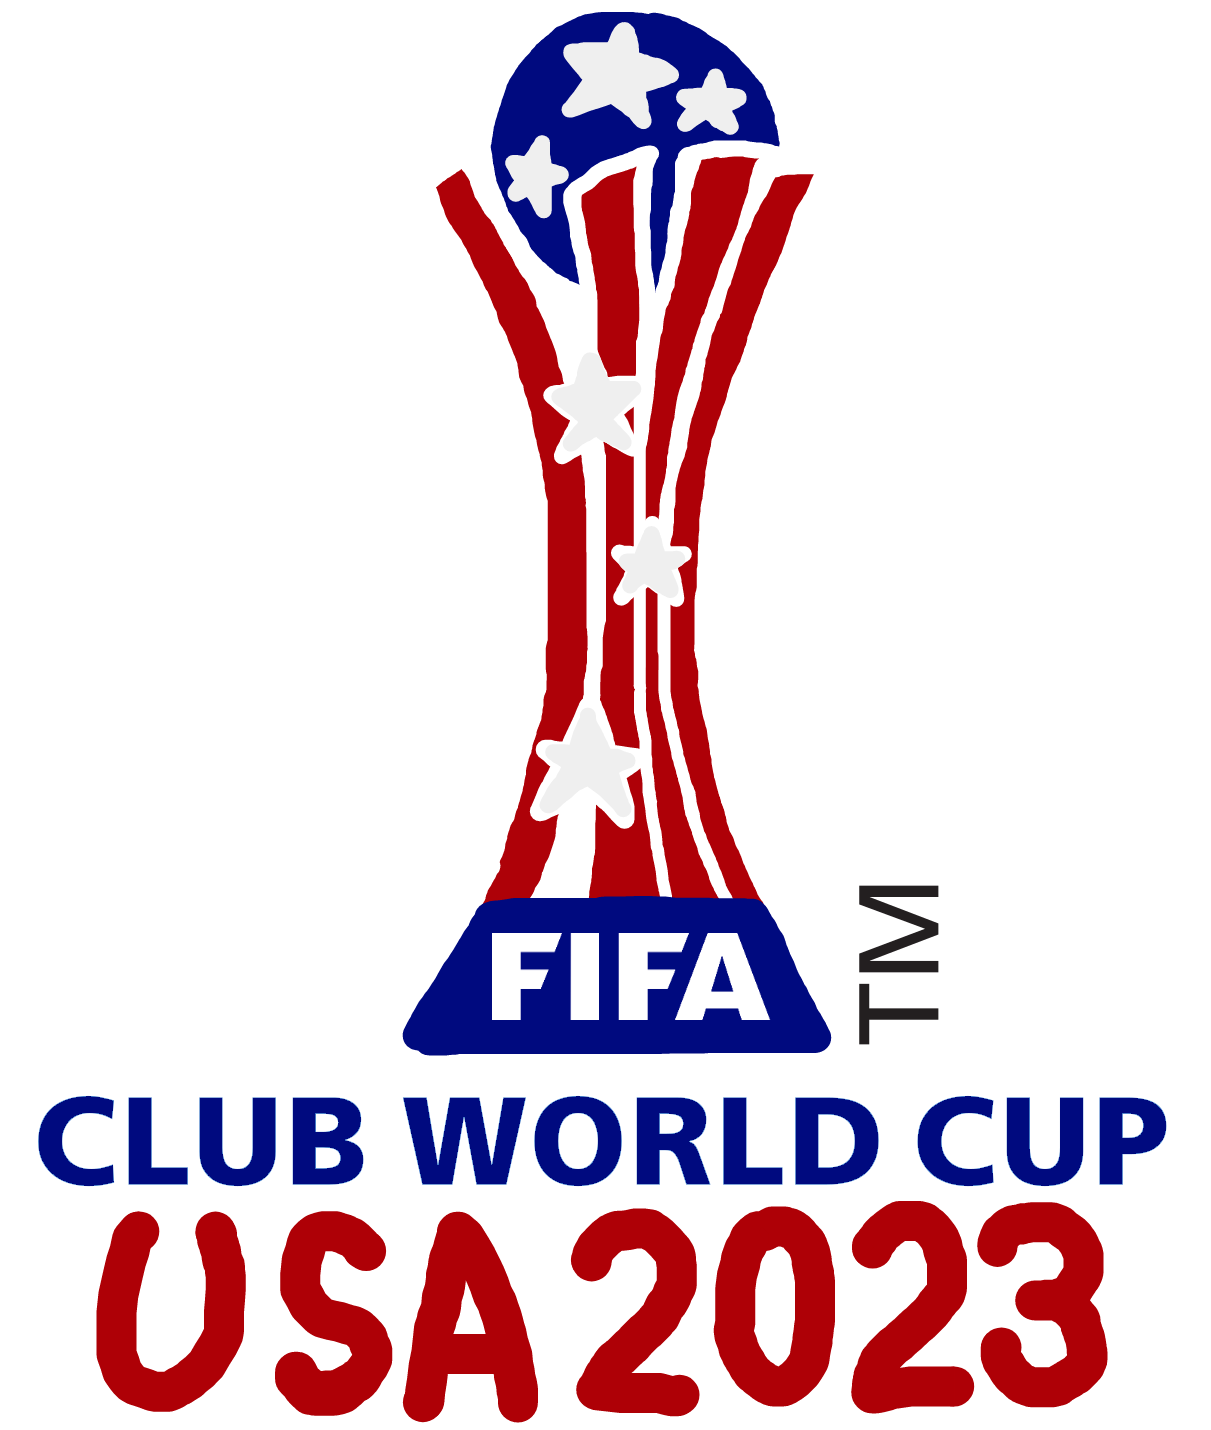 FIFA Club World Cup USA 2023 Logo by PaintRubber38 on DeviantArt